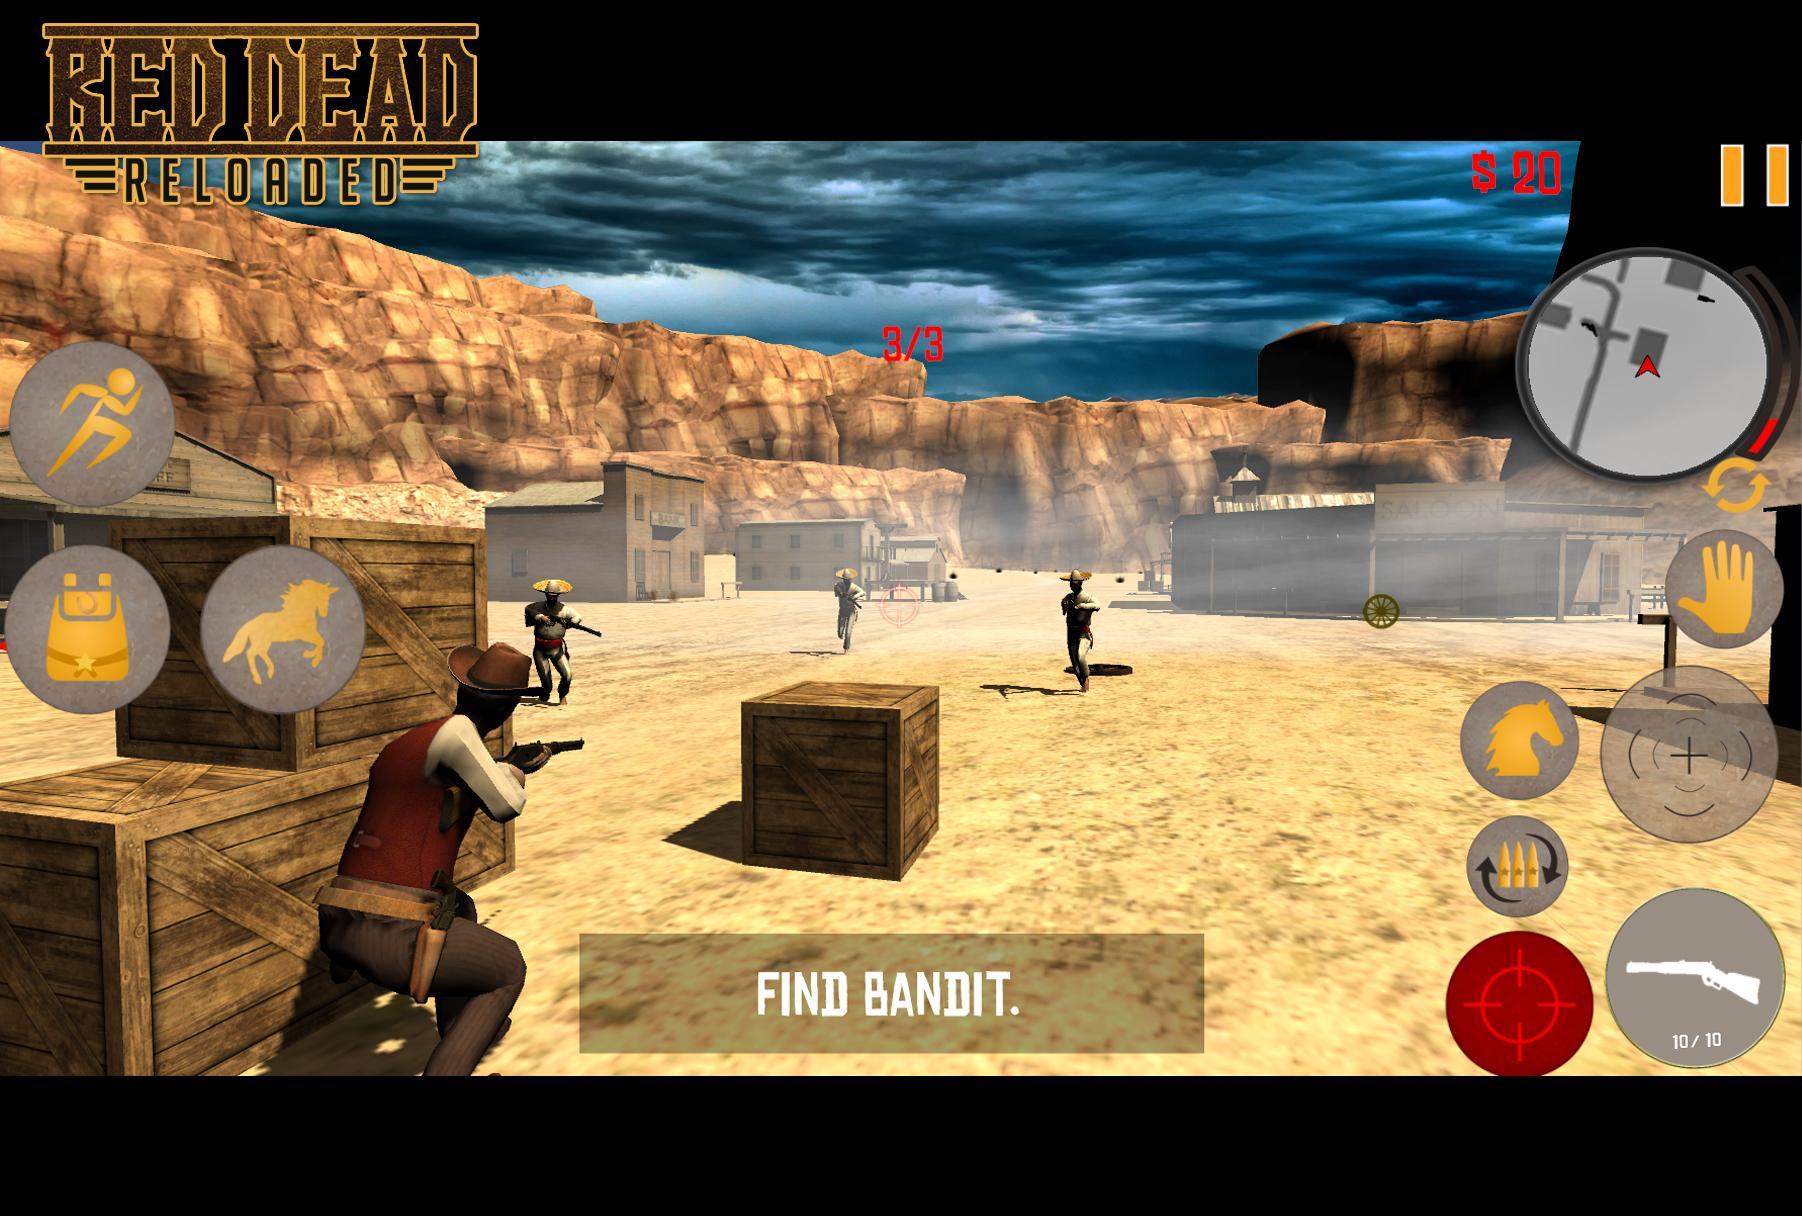 Screenshot of R Western Dead Reloaded (Sandbox styled Action)